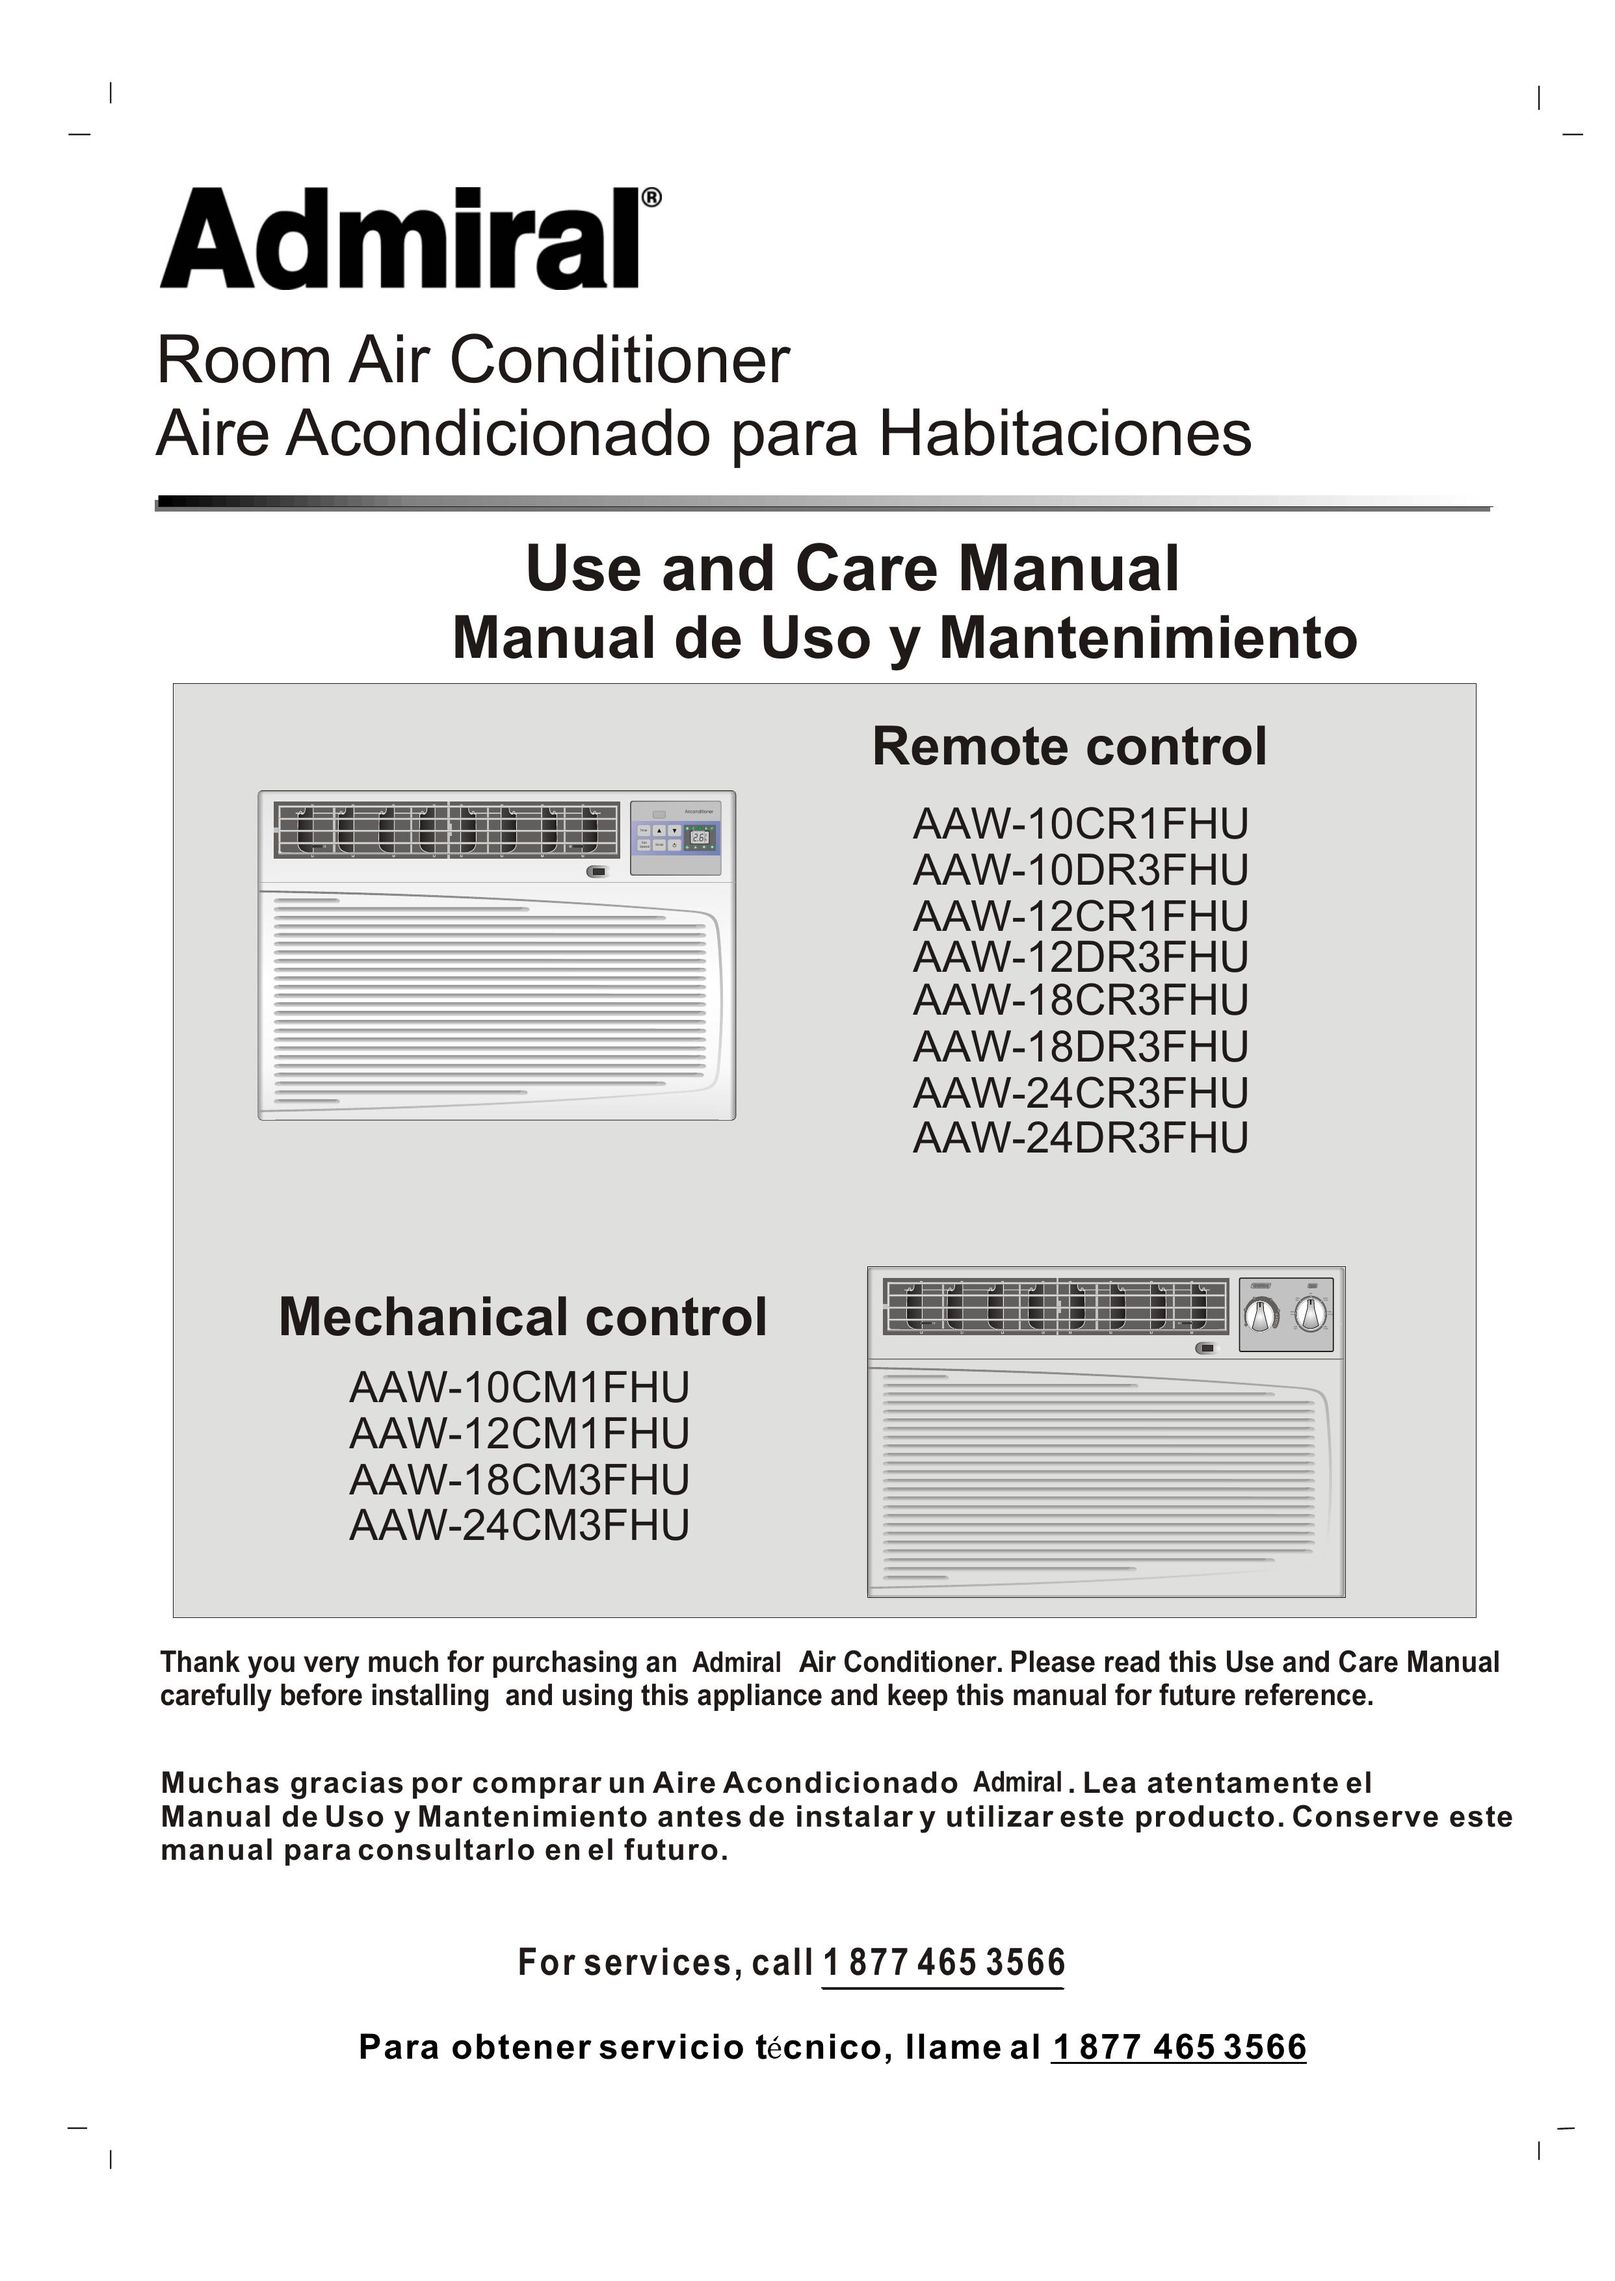 Admiral AAW-10CR1FHU Air Conditioner User Manual